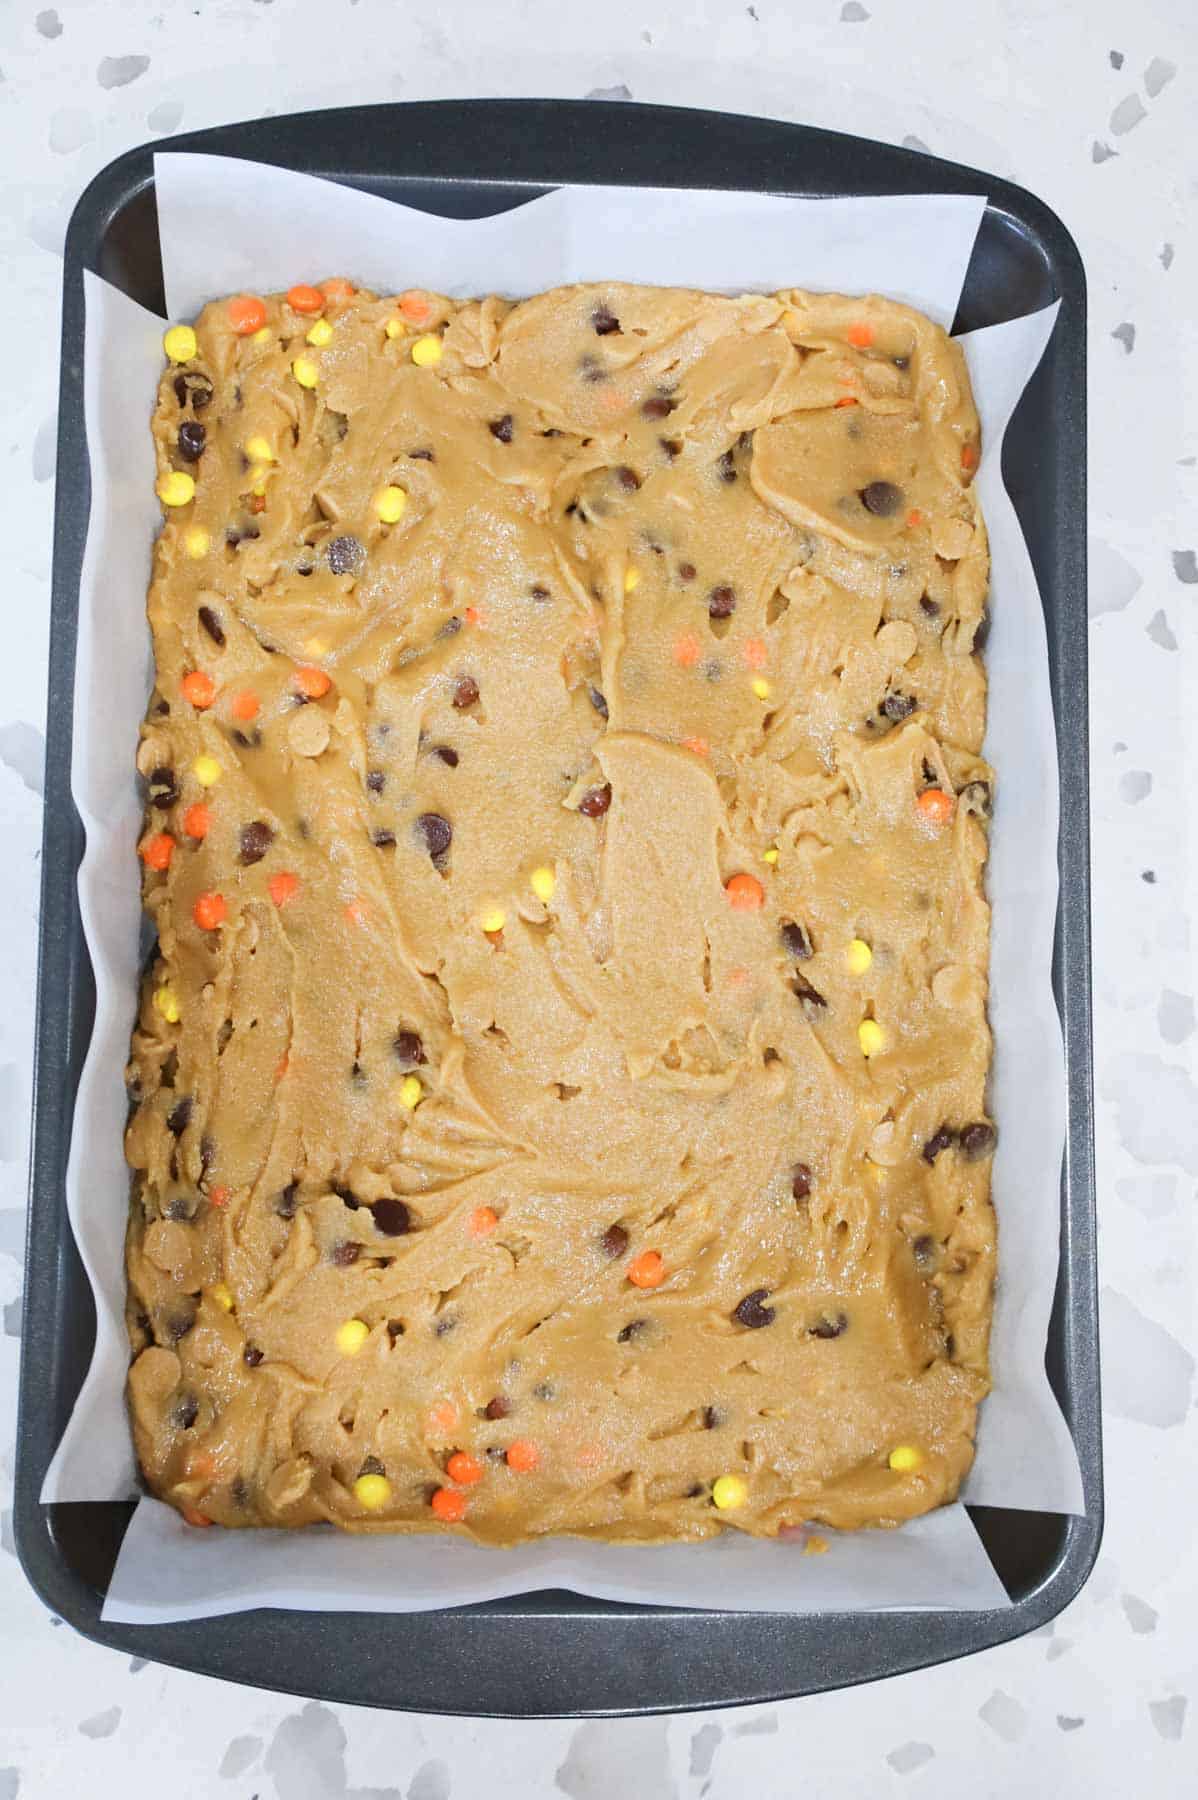 peanut butter blondie batter in a parchment lined baking pan